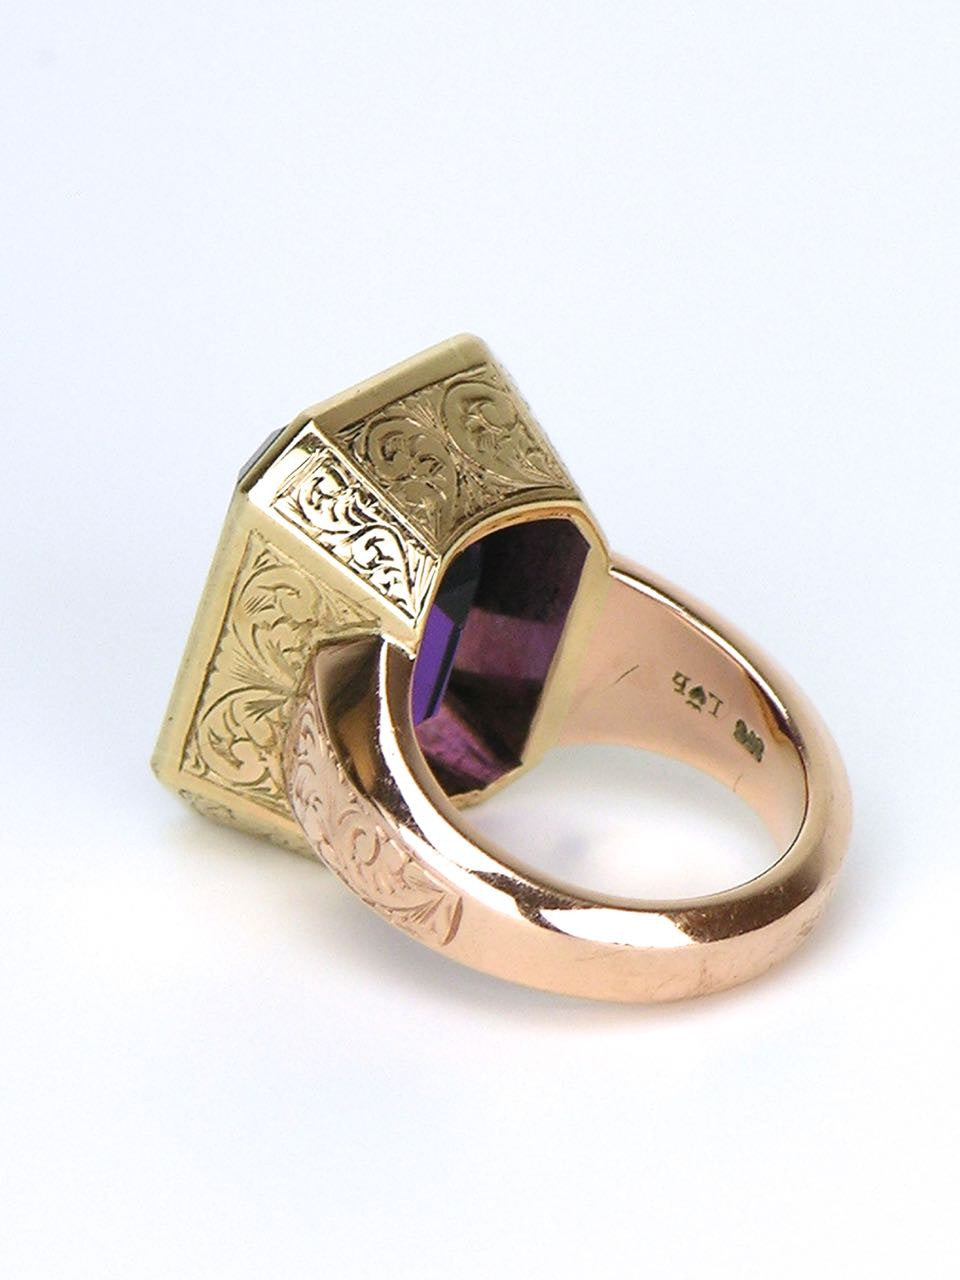 Vintage Amethyst and Gold Cocktail Ring - Love and Hatred